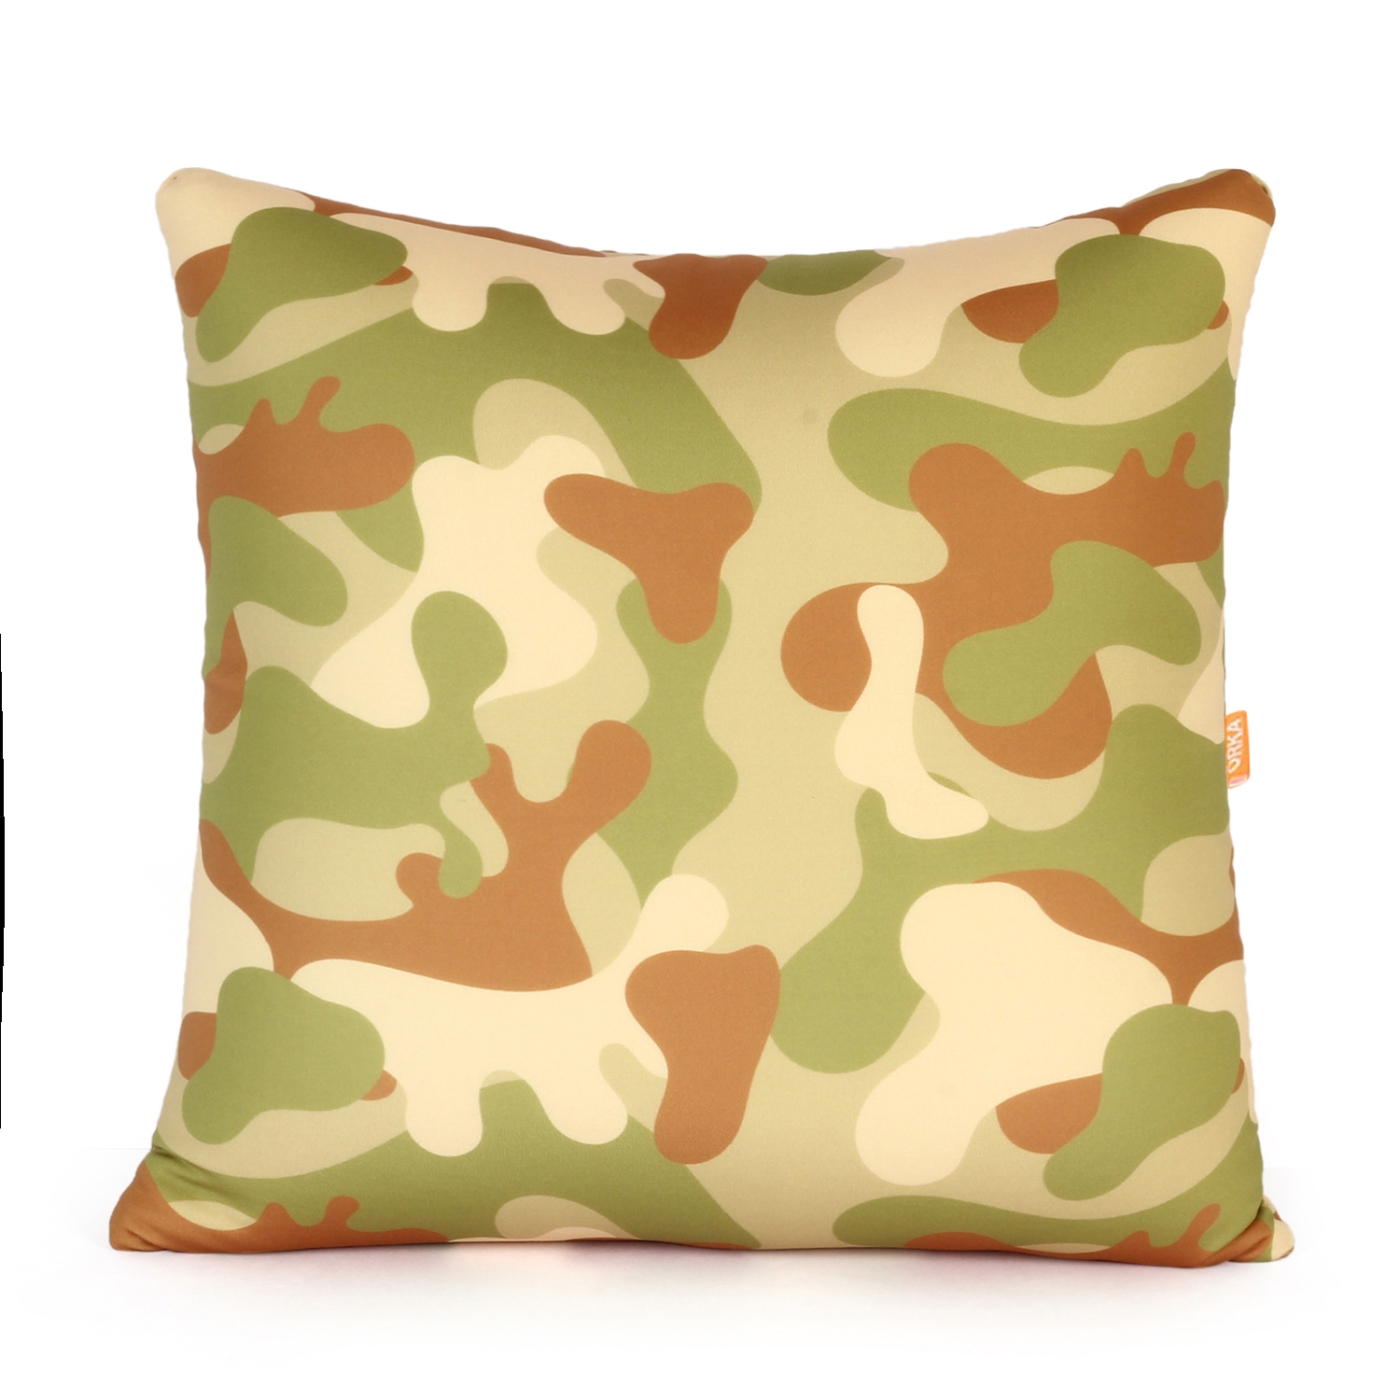 ORKA Army Digital Printed Spandex Filled With Microbeads Square Cushion 14 X 14 Inch   